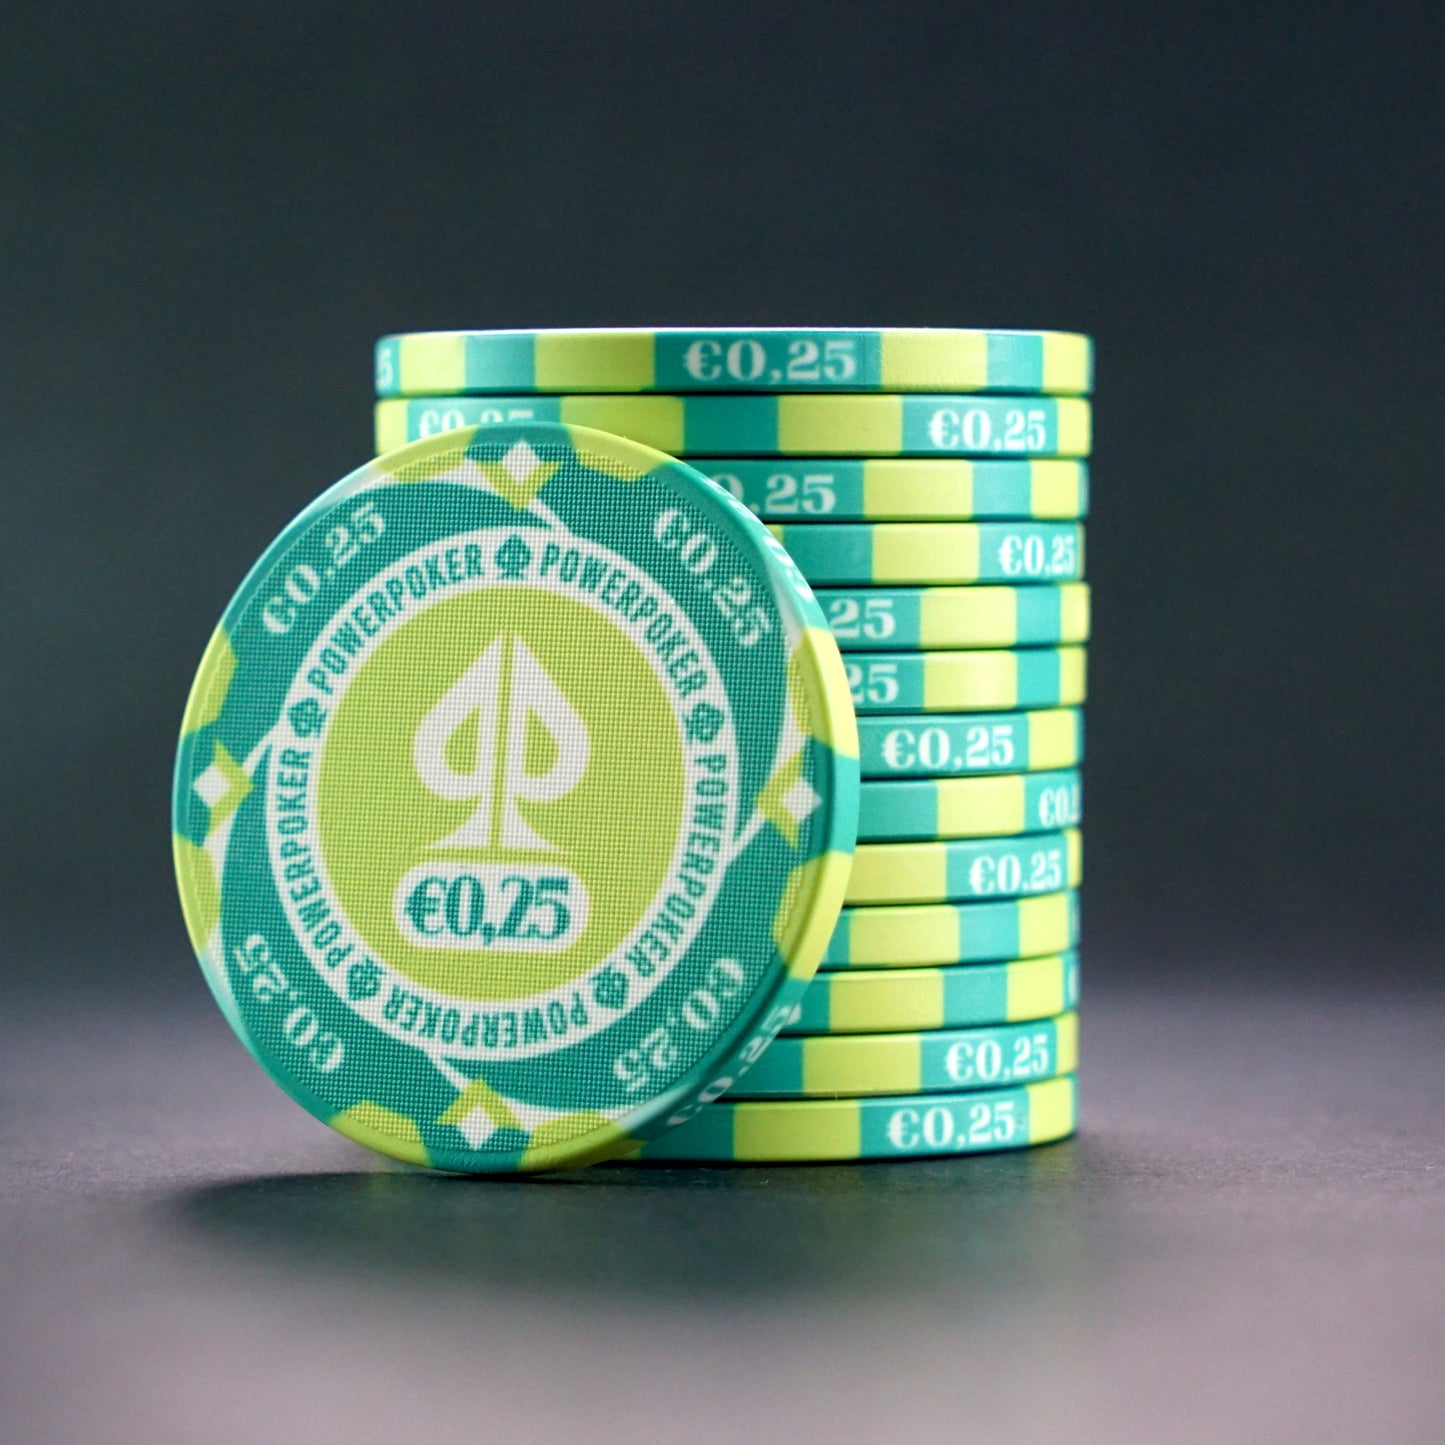 Hurricane Edition 25 - Ceramic Poker Chips (25 pieces)